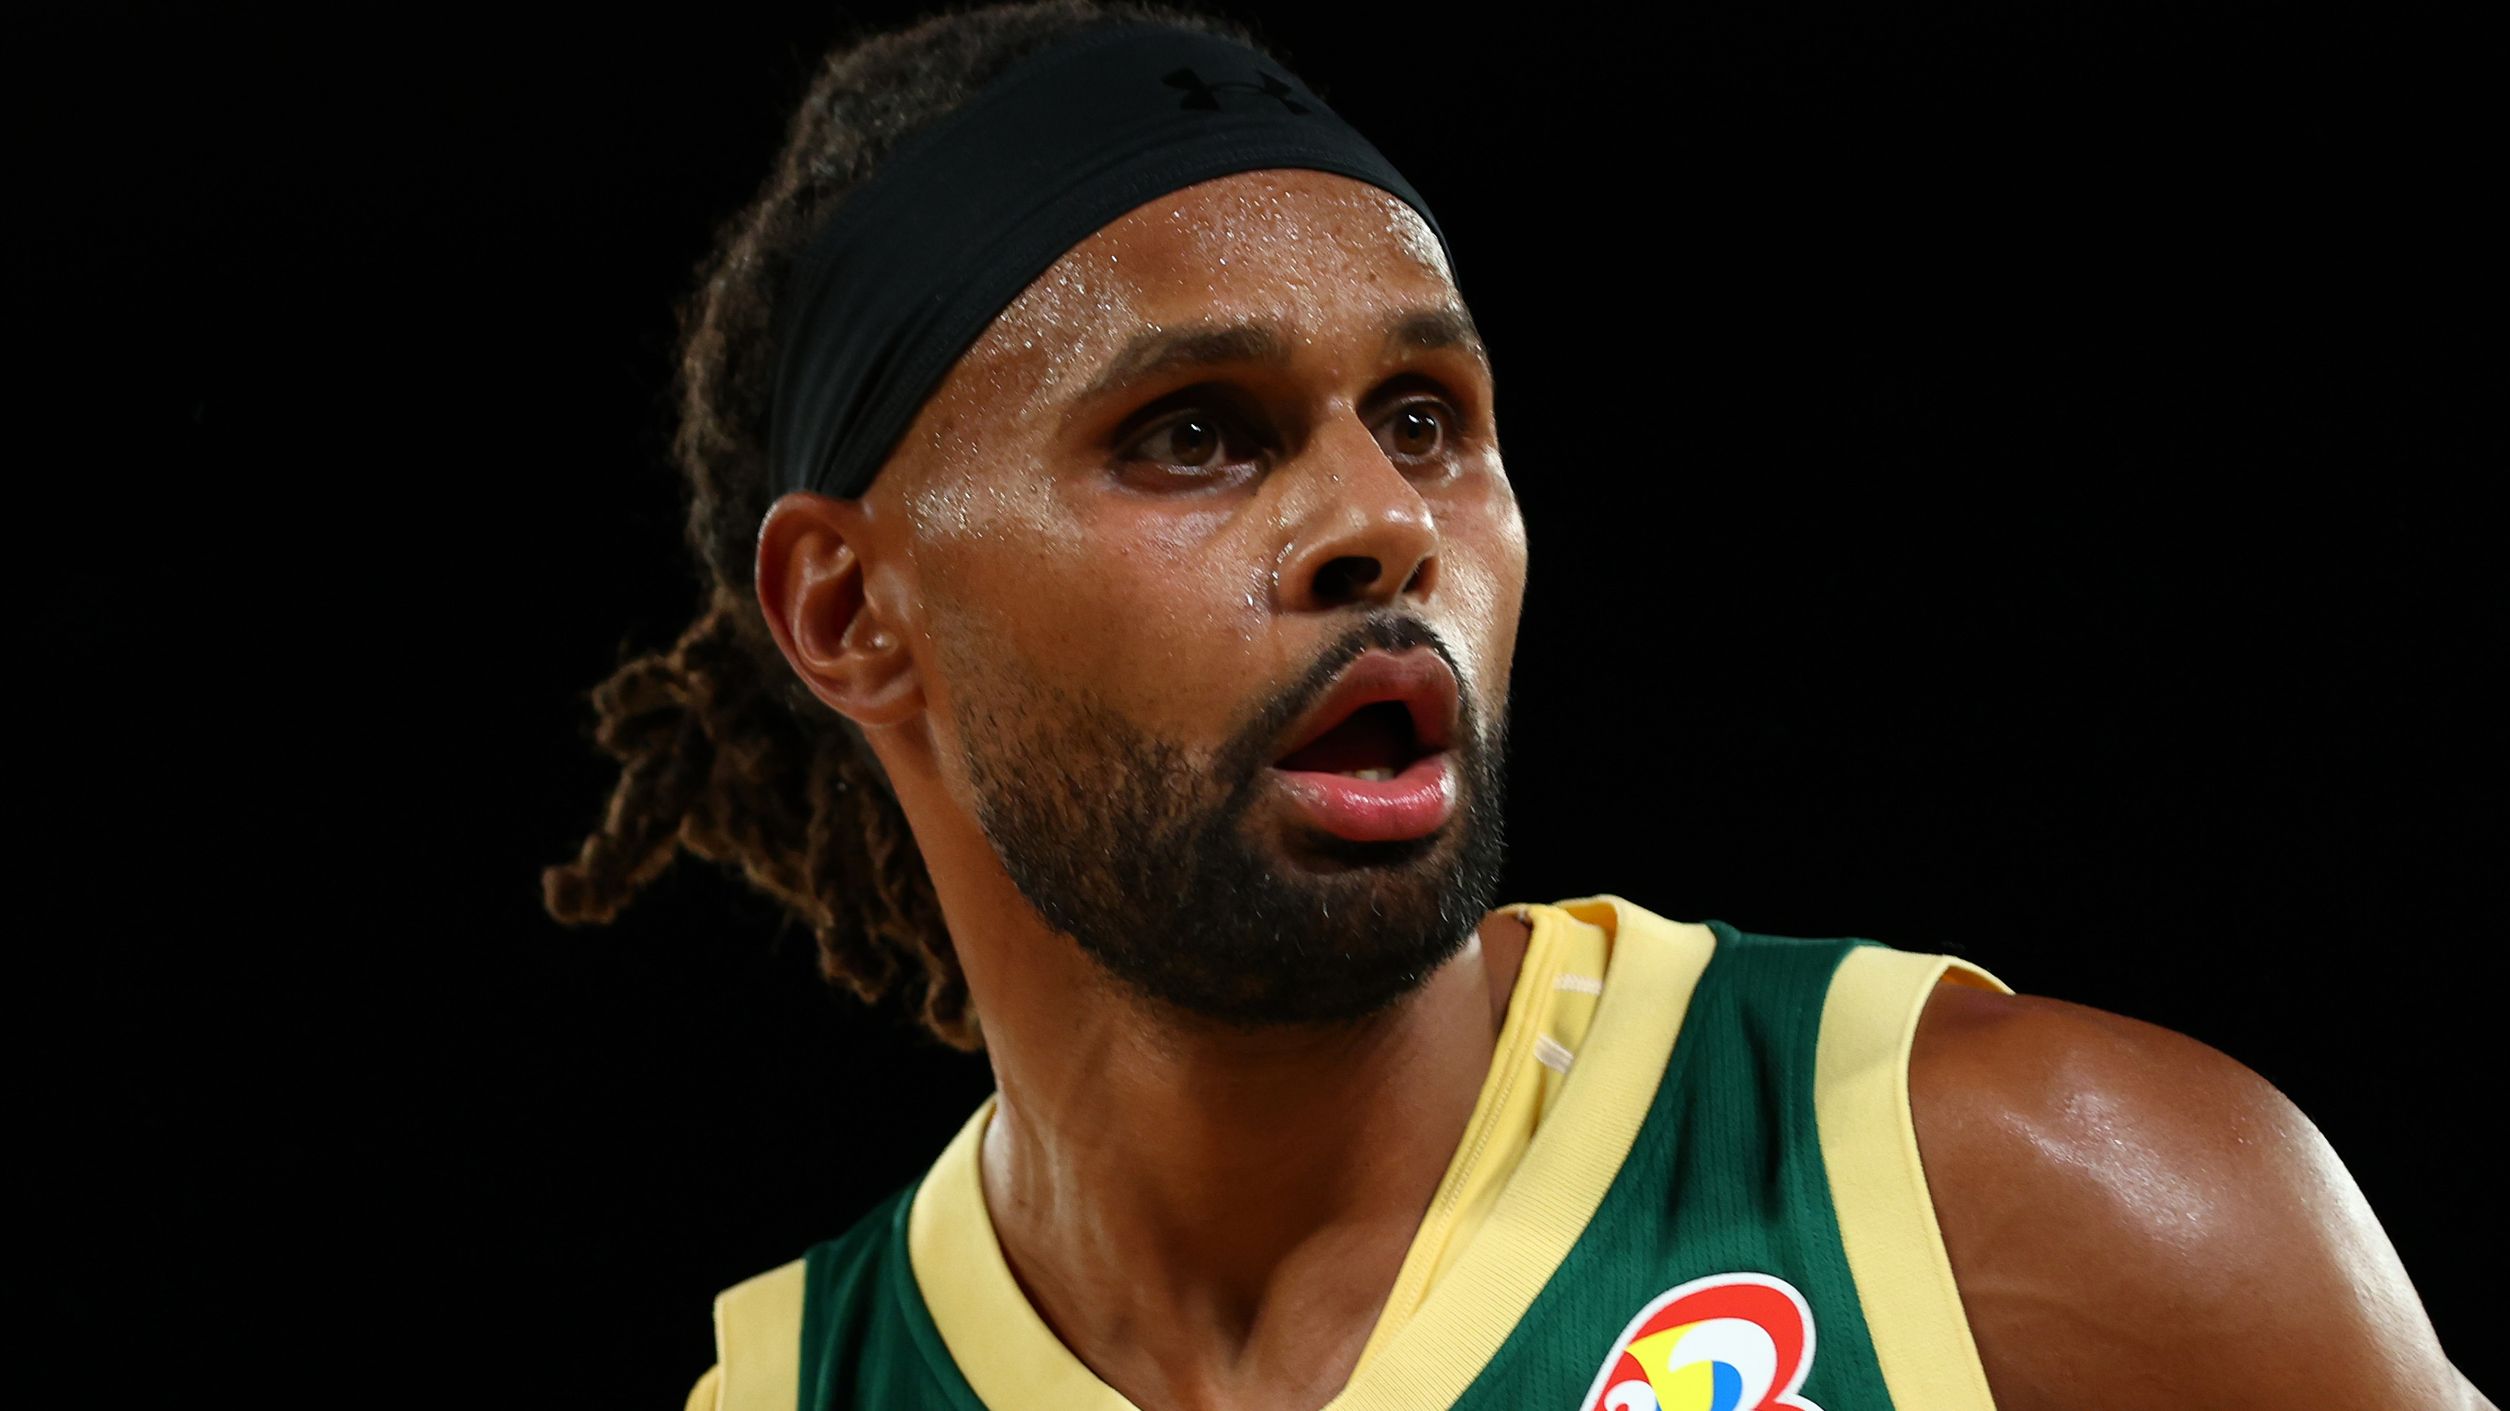 MELBOURNE, AUSTRALIA - AUGUST 14: Patty Mills of the Boomers looks on during the match between Australia Boomers and Venezuela at Rod Laver Arena on August 14, 2023 in Melbourne, Australia. (Photo by Graham Denholm/Getty Images)